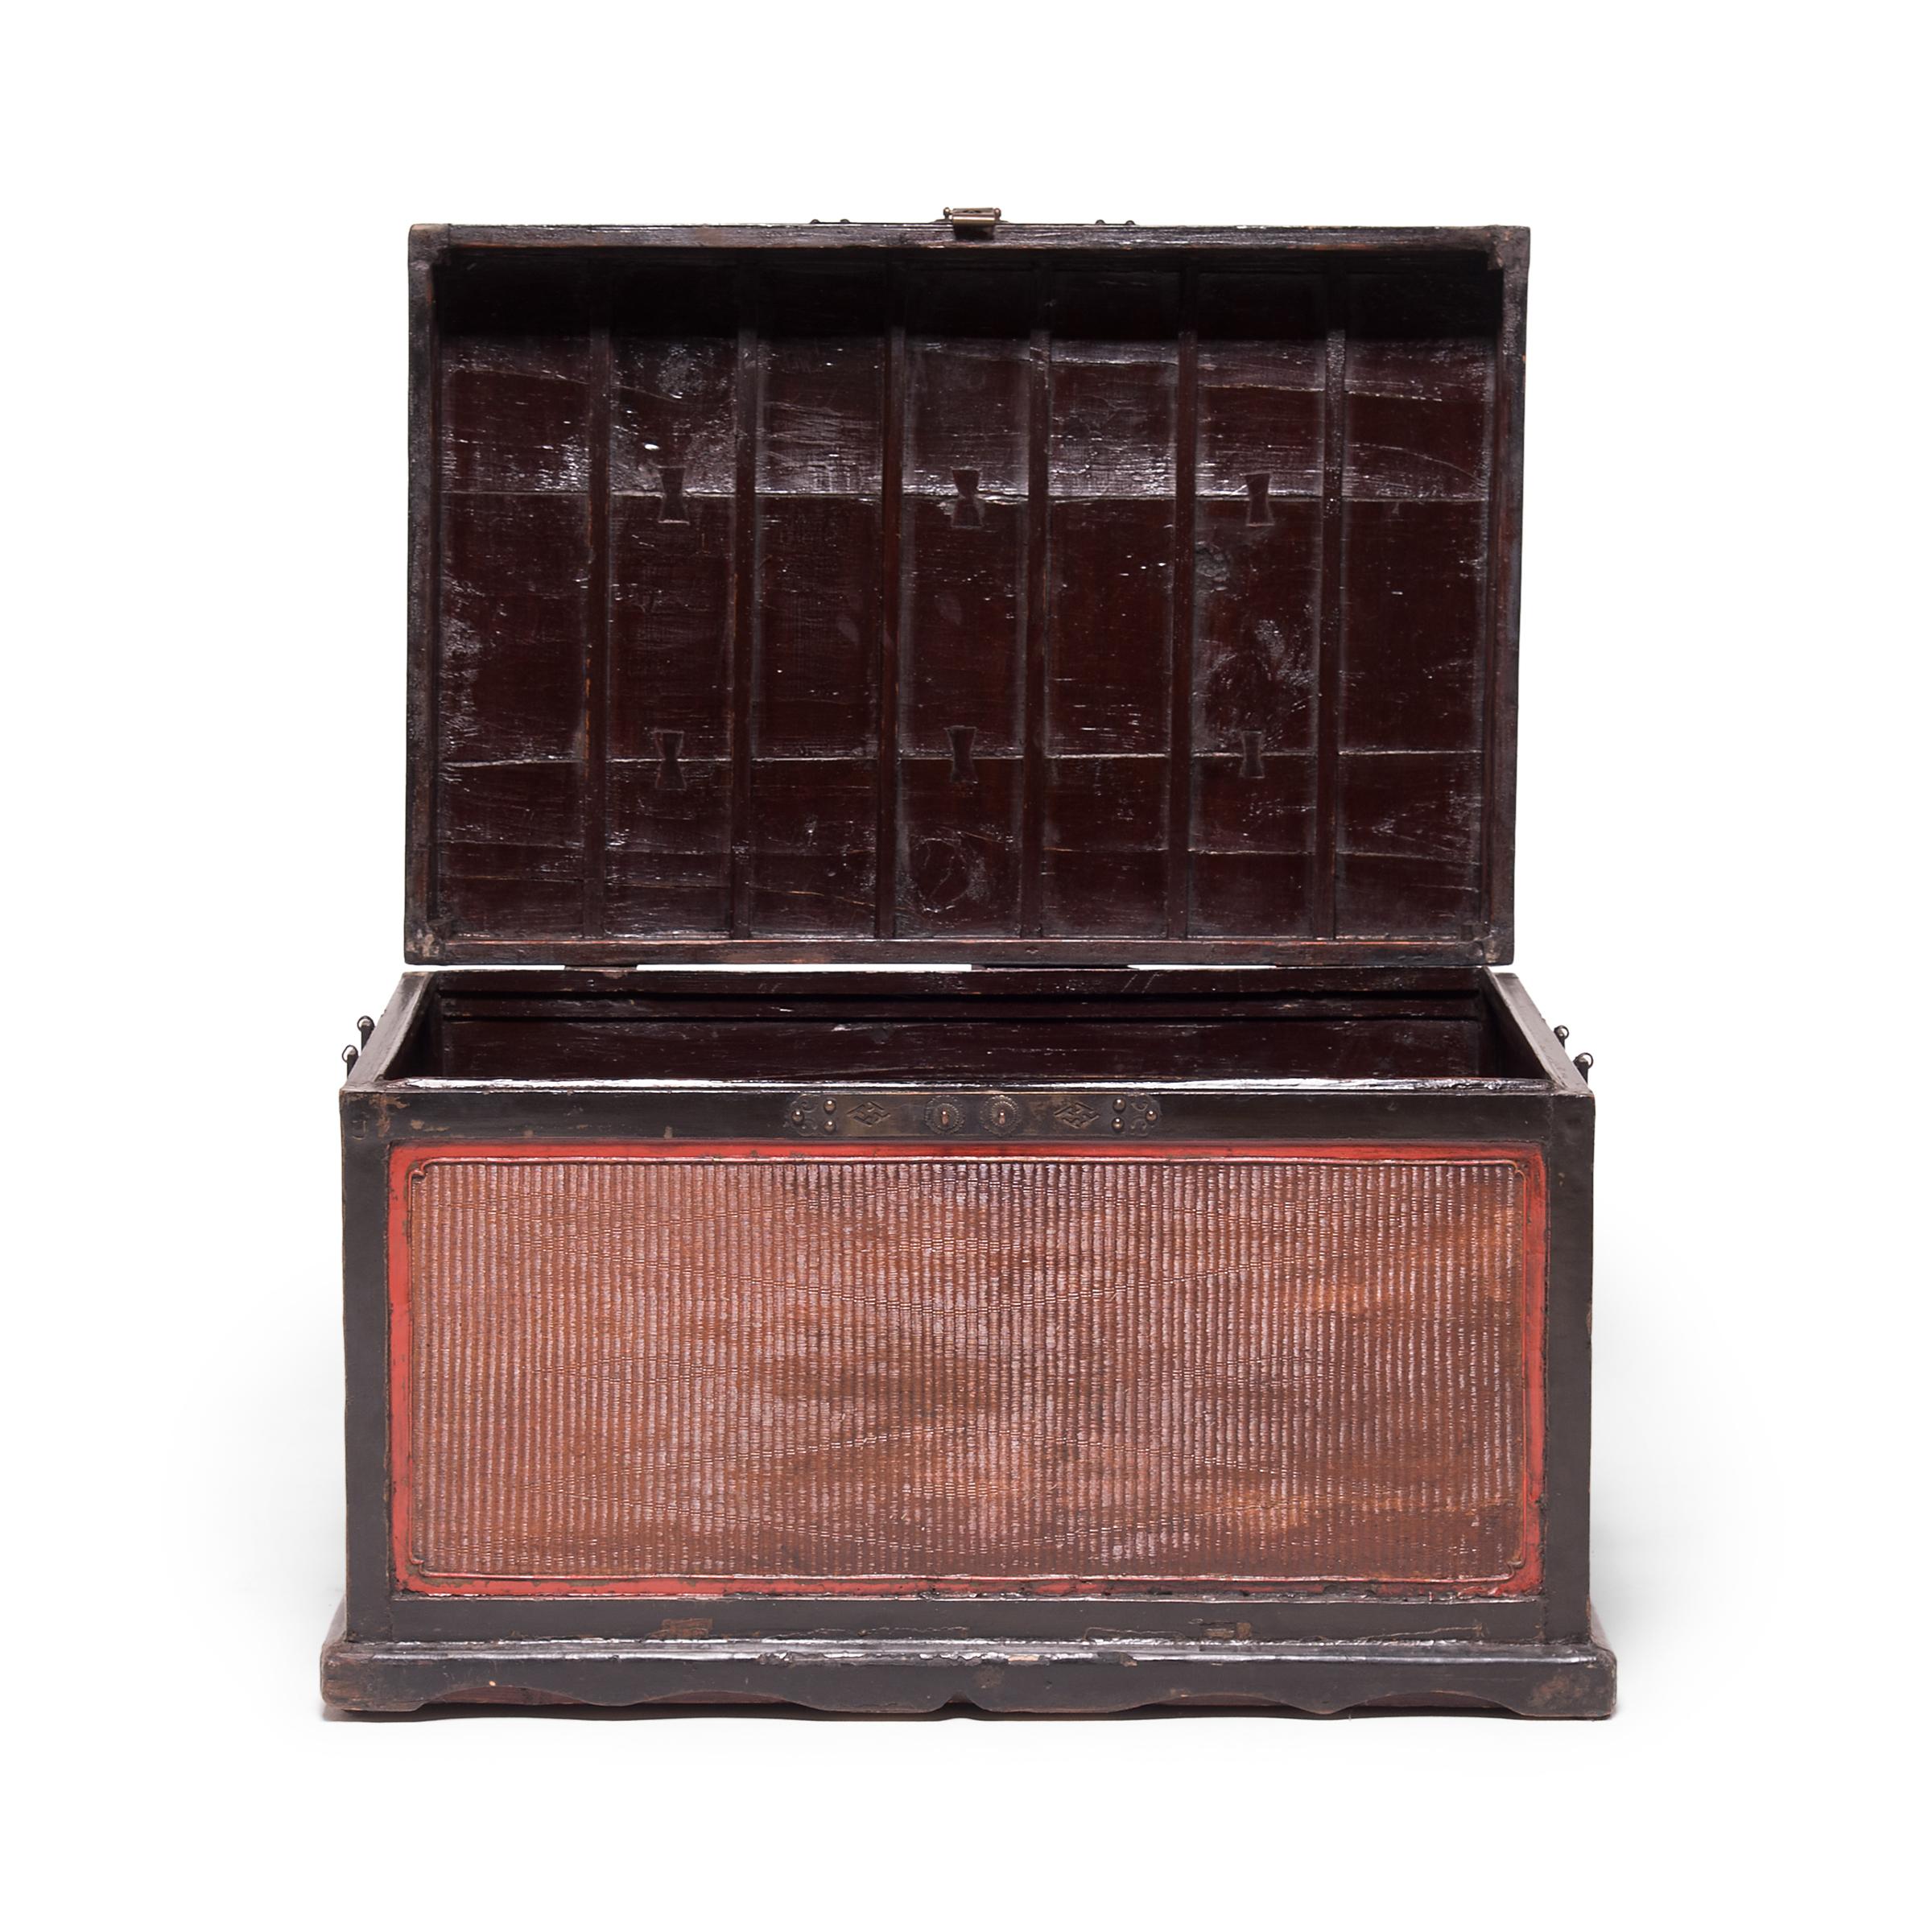 Chinese courtyard homes were traditionally designed without closets, so trunks such as this were frequently used for safekeeping and storage. This very fine early 19th century example, lined in cedar, was likely used in a aristocratic home for